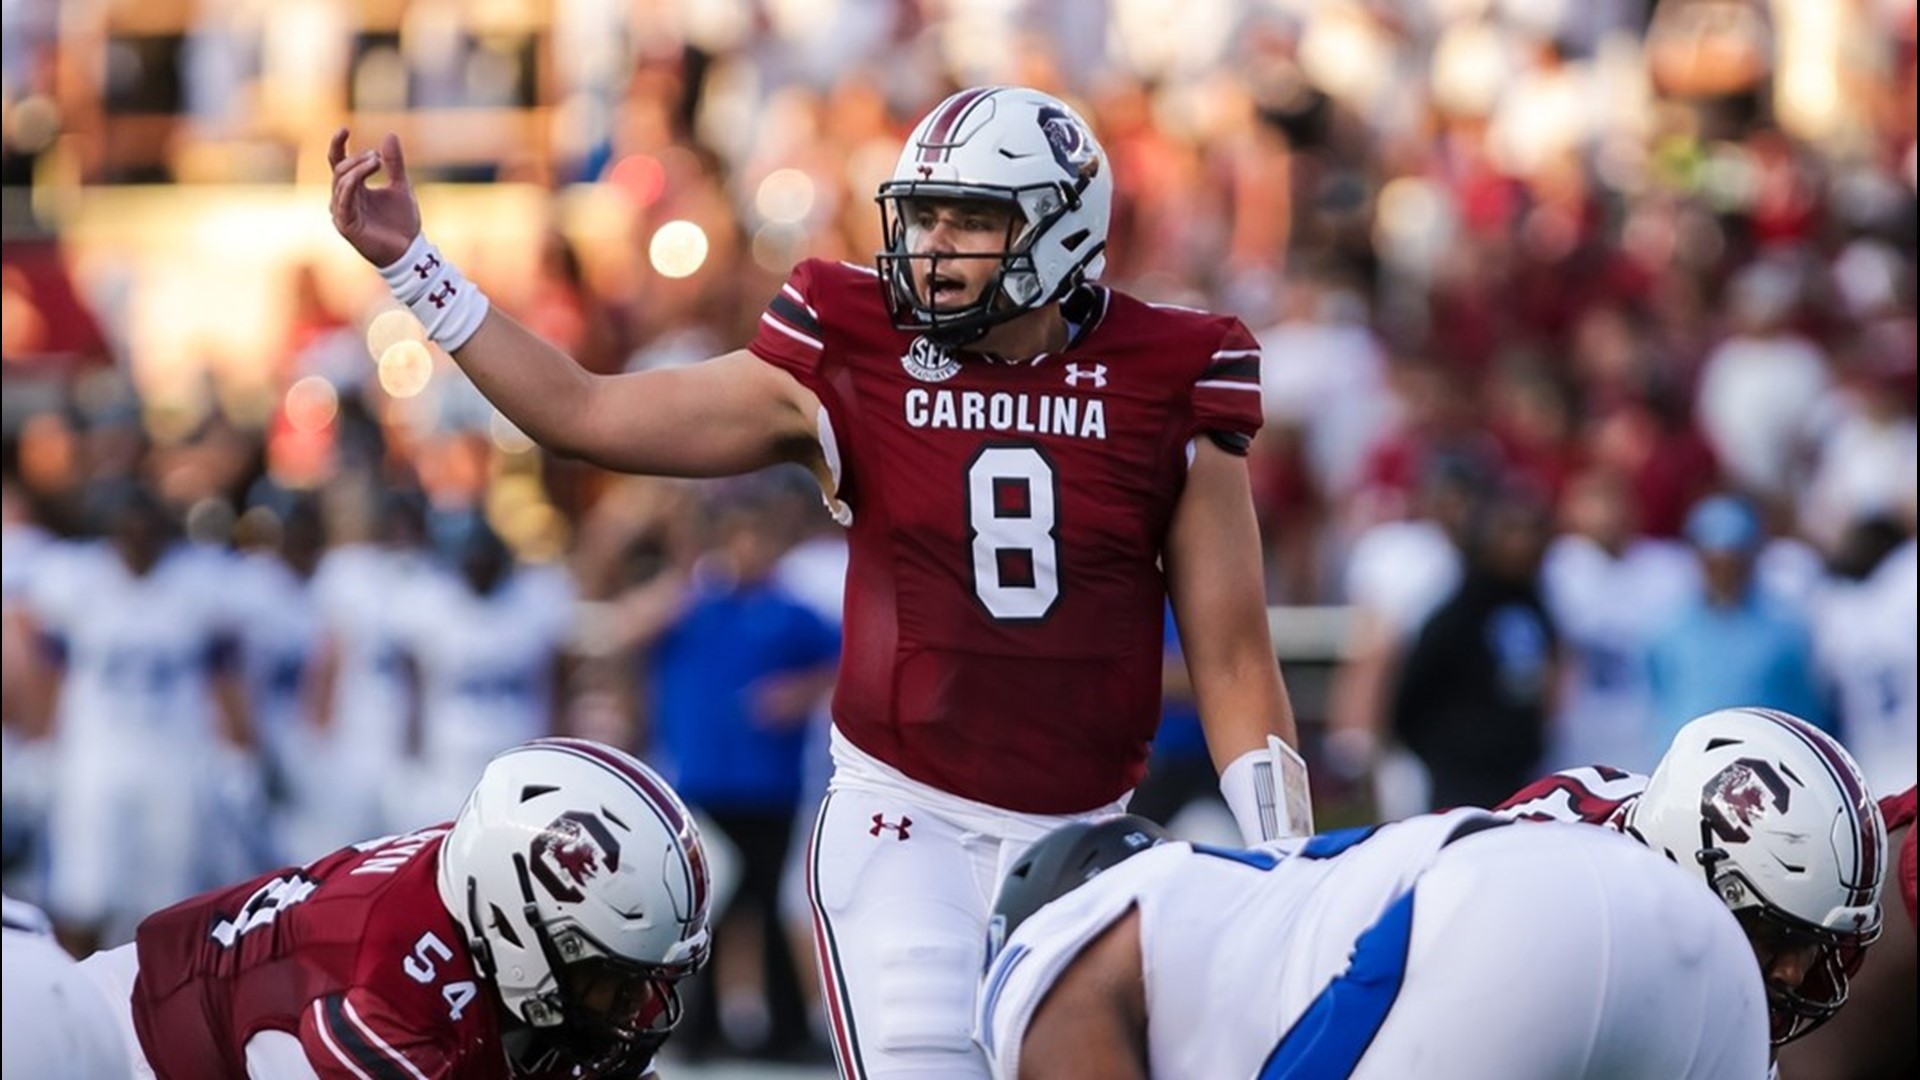 The Gamecocks starting Quarterback is expected to be ready for the team's matchup vs Florida on November 6th.